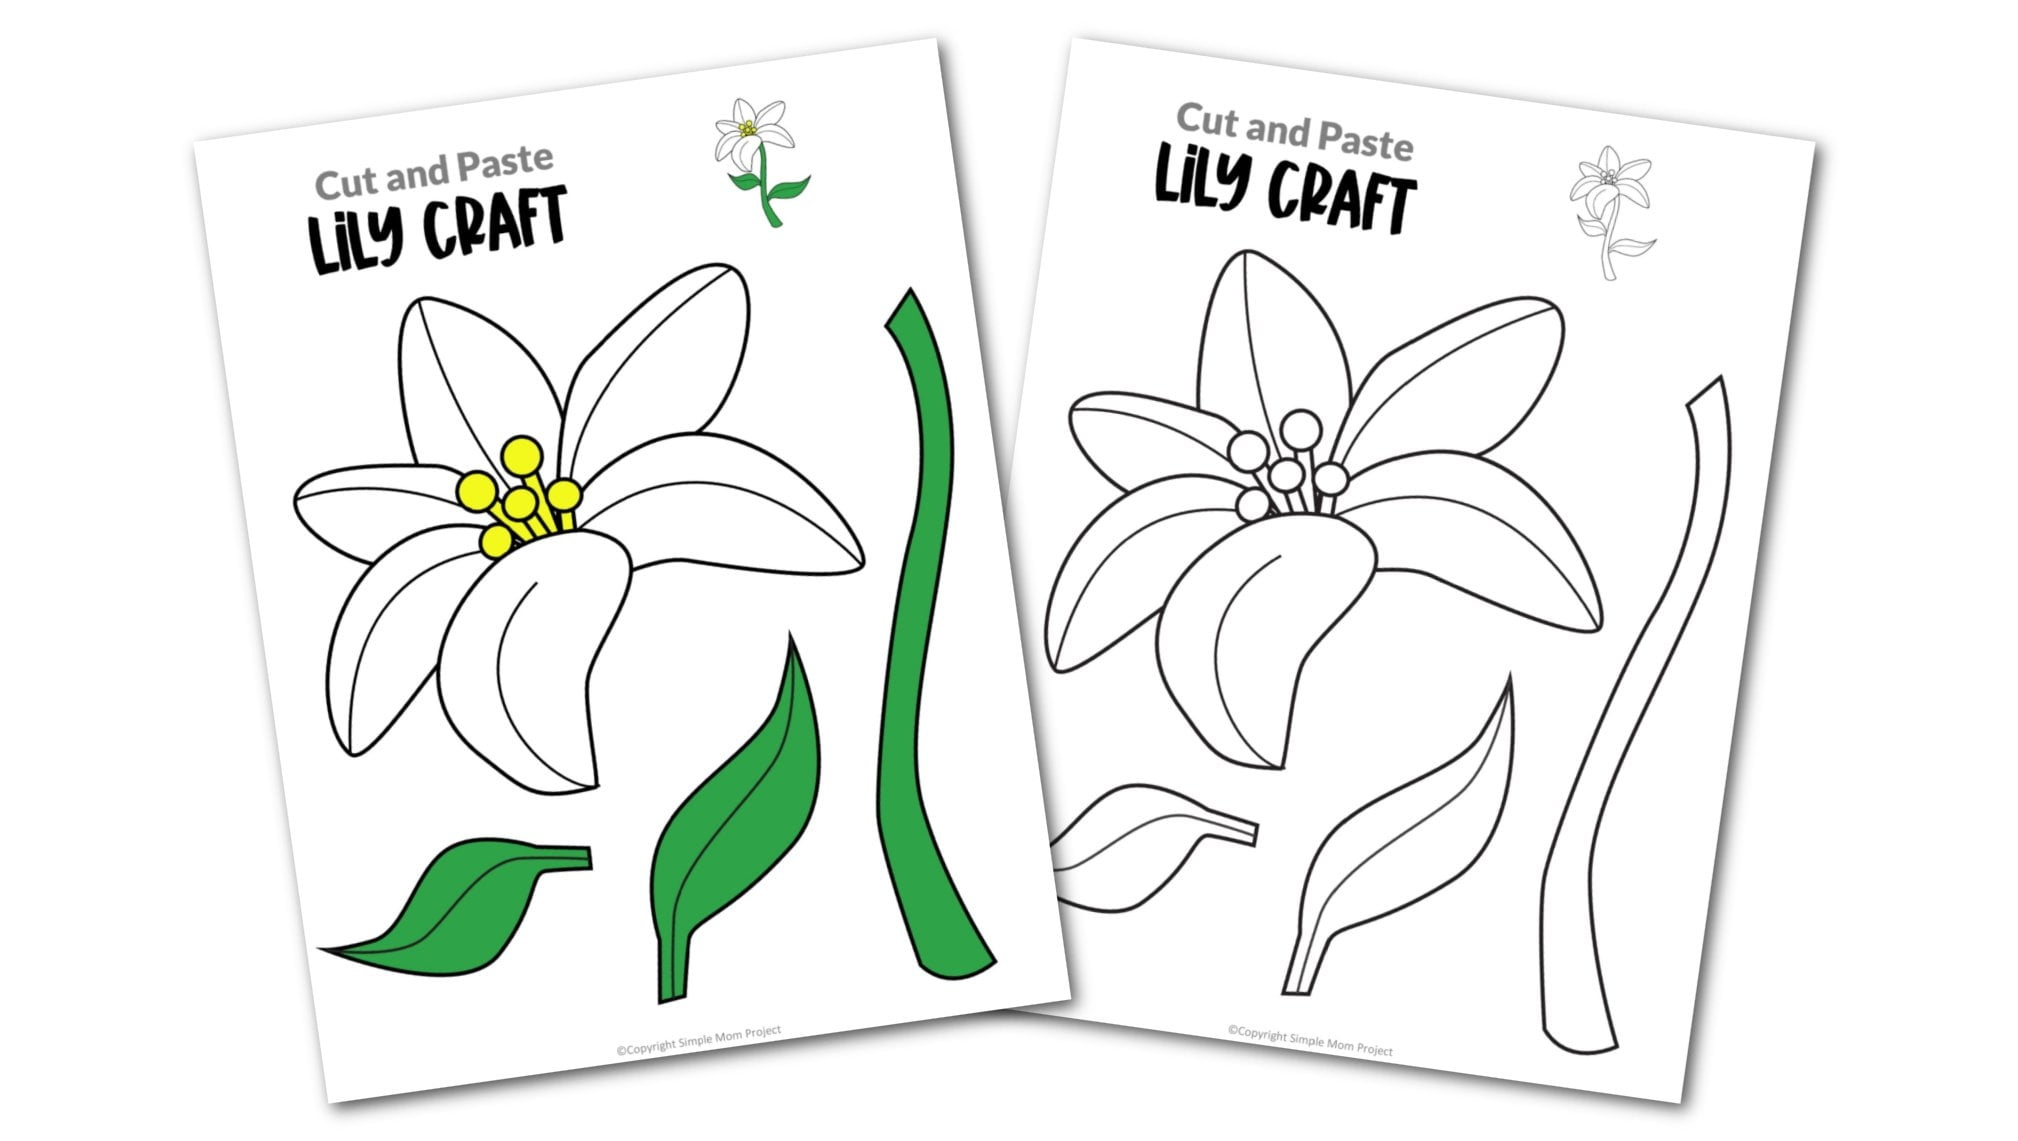 Free Printable Lily Craft Template Simple Mom Project